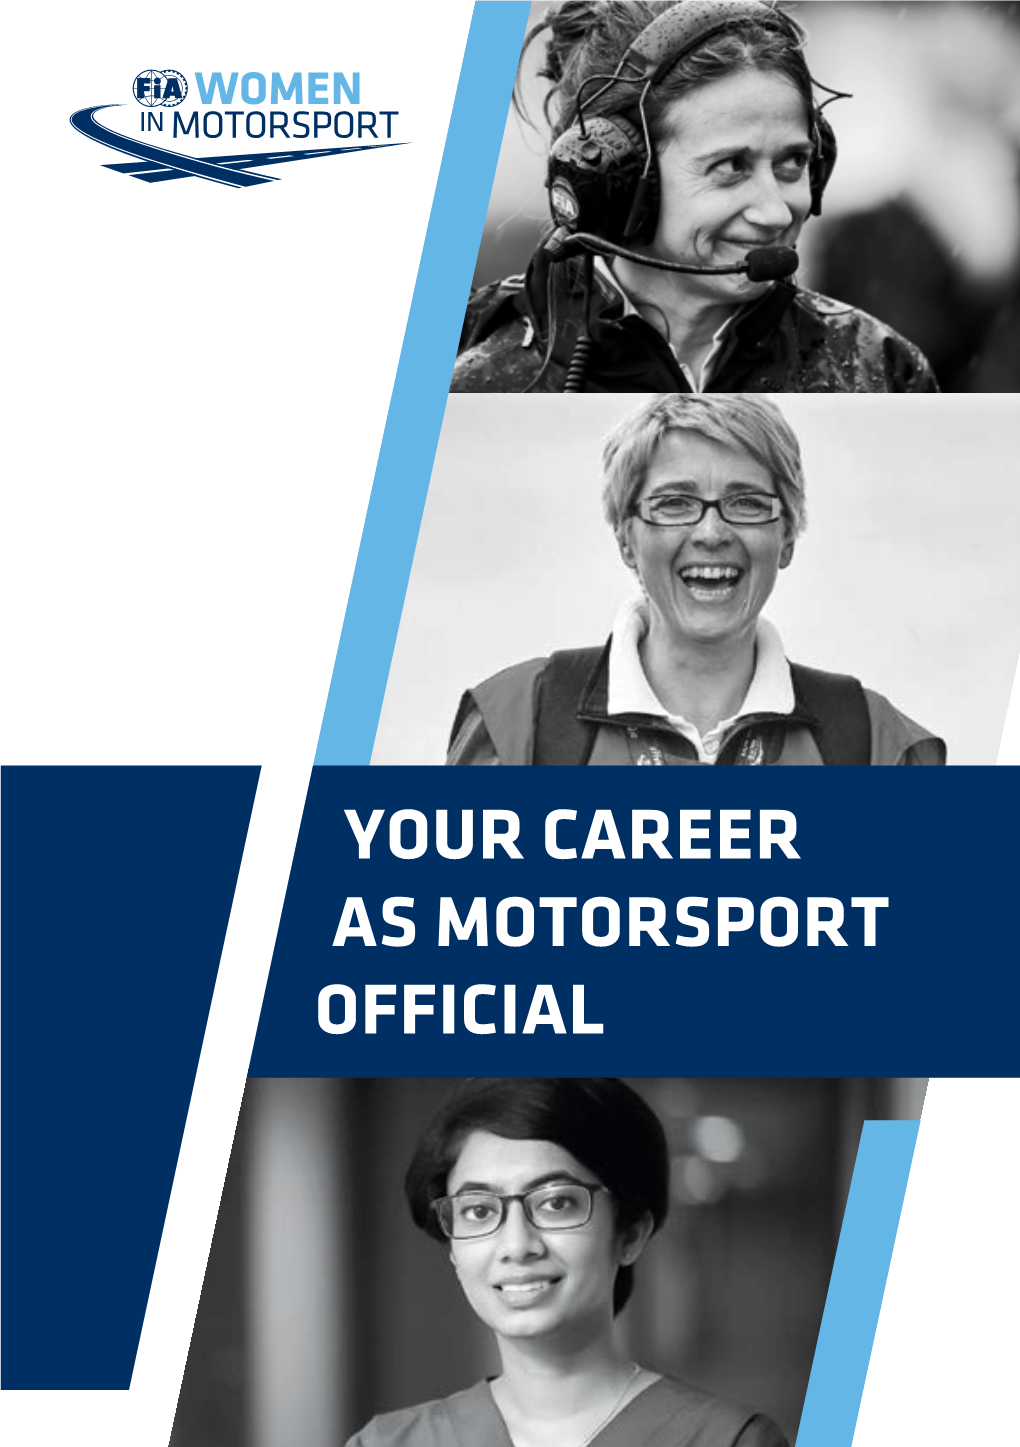 Your Career As Motorsport Official Content